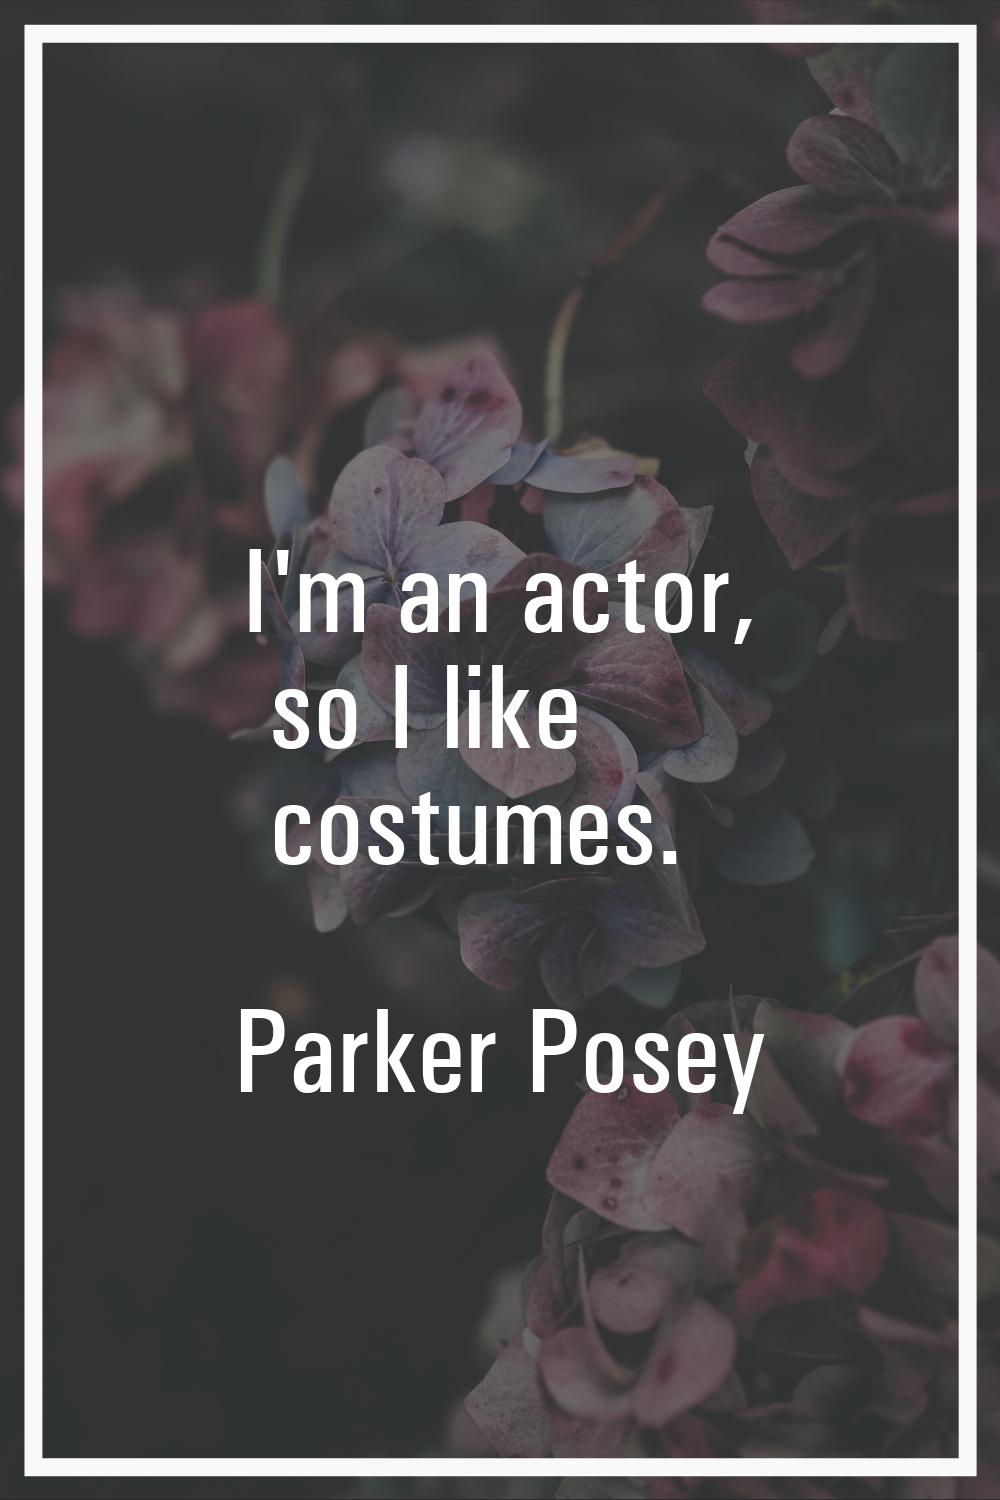 I'm an actor, so I like costumes.